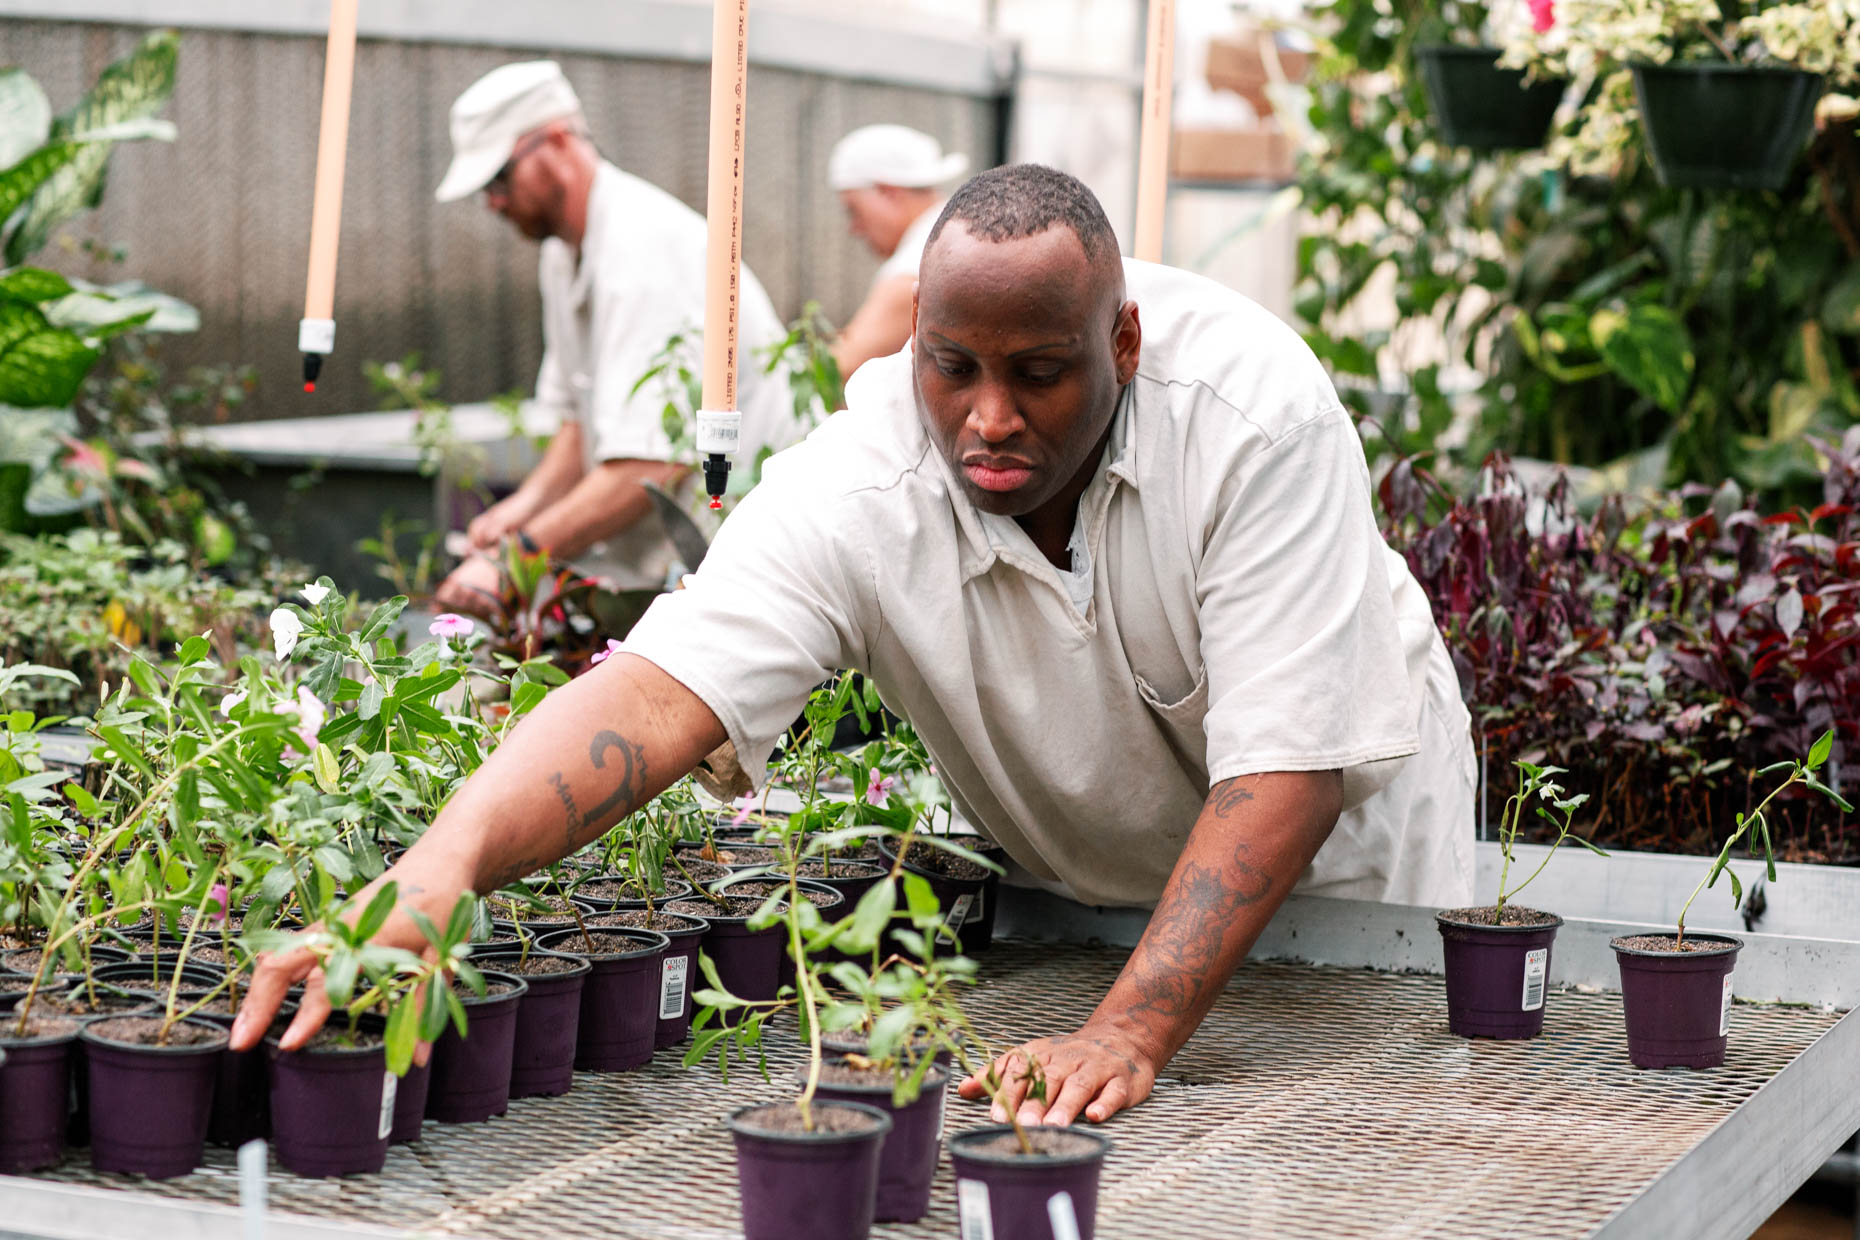 Texas prisoner working with plants in a gardening class. Editorial photography